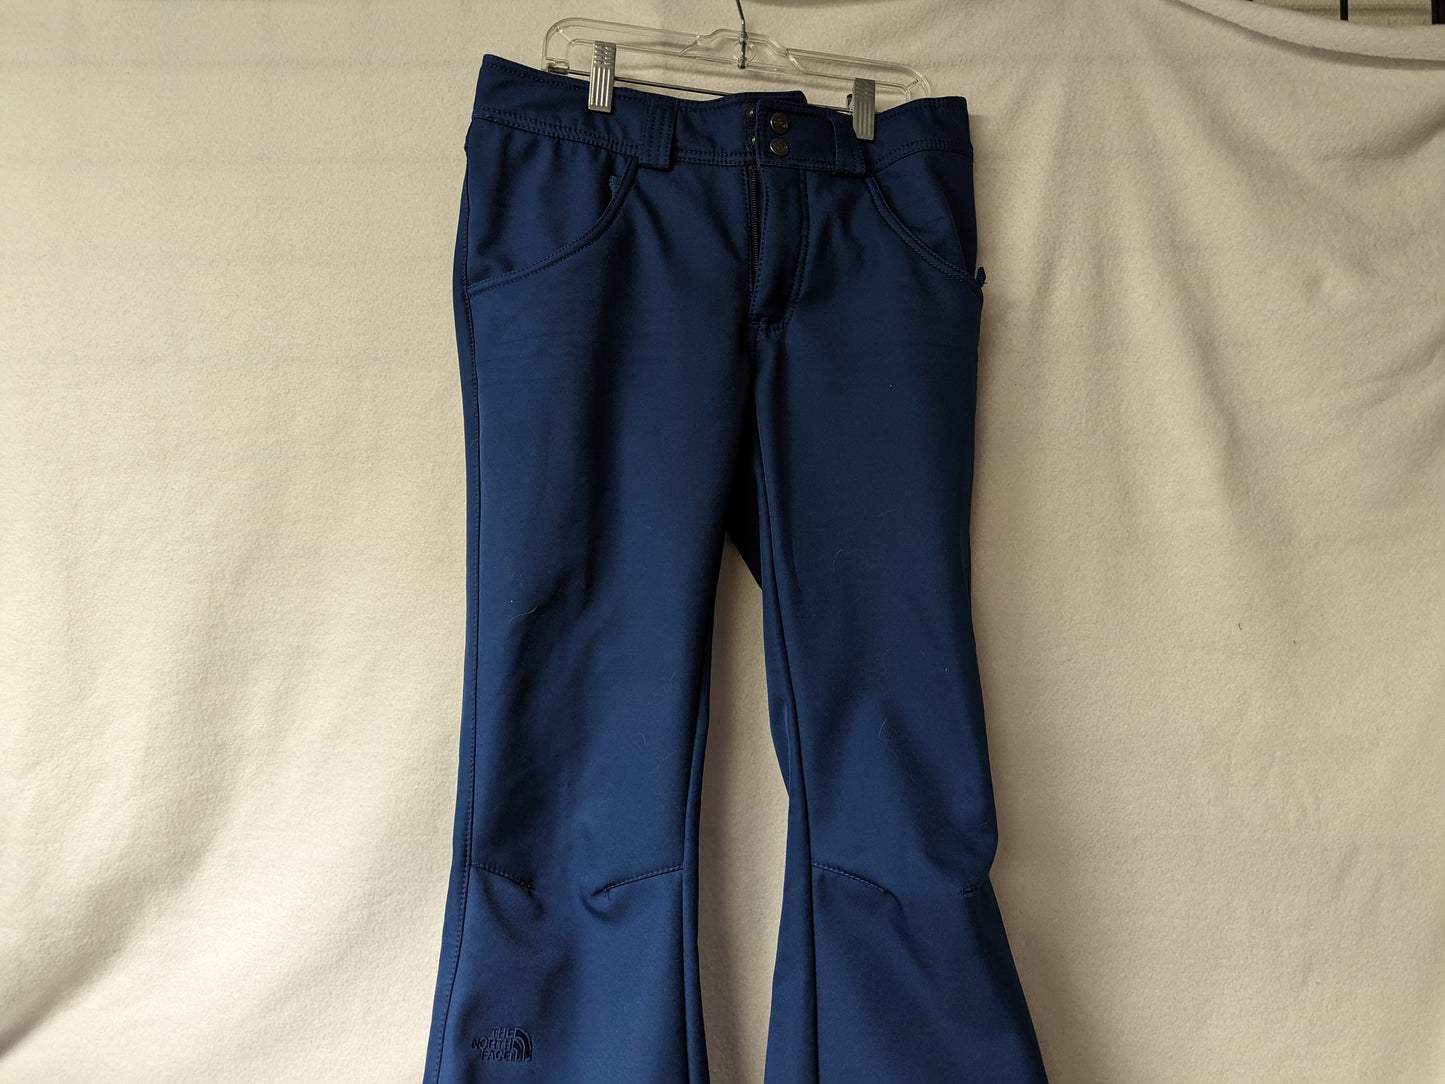 The North Face Women's Ski/Snowboard Pants Size Women Small Color Blue Condition Used